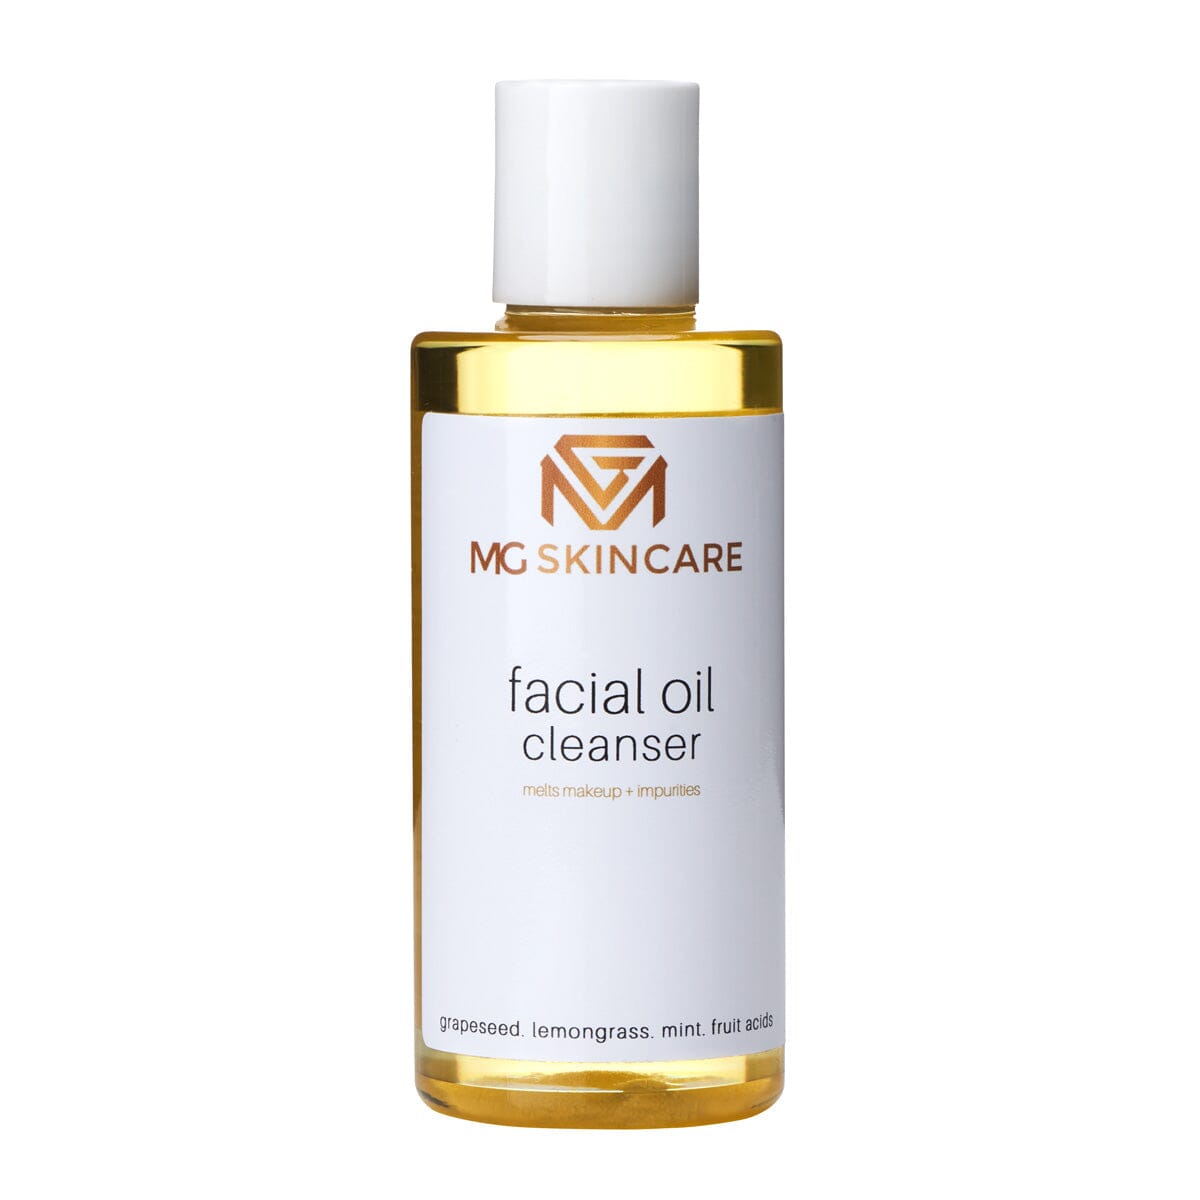 you the ultimate skincare experience. Facial Oil Cleanser - Deeply cleanse and hydrate your skin with our top-quality formula! Beauty & Health - Skin Care - Face MG Skincare 